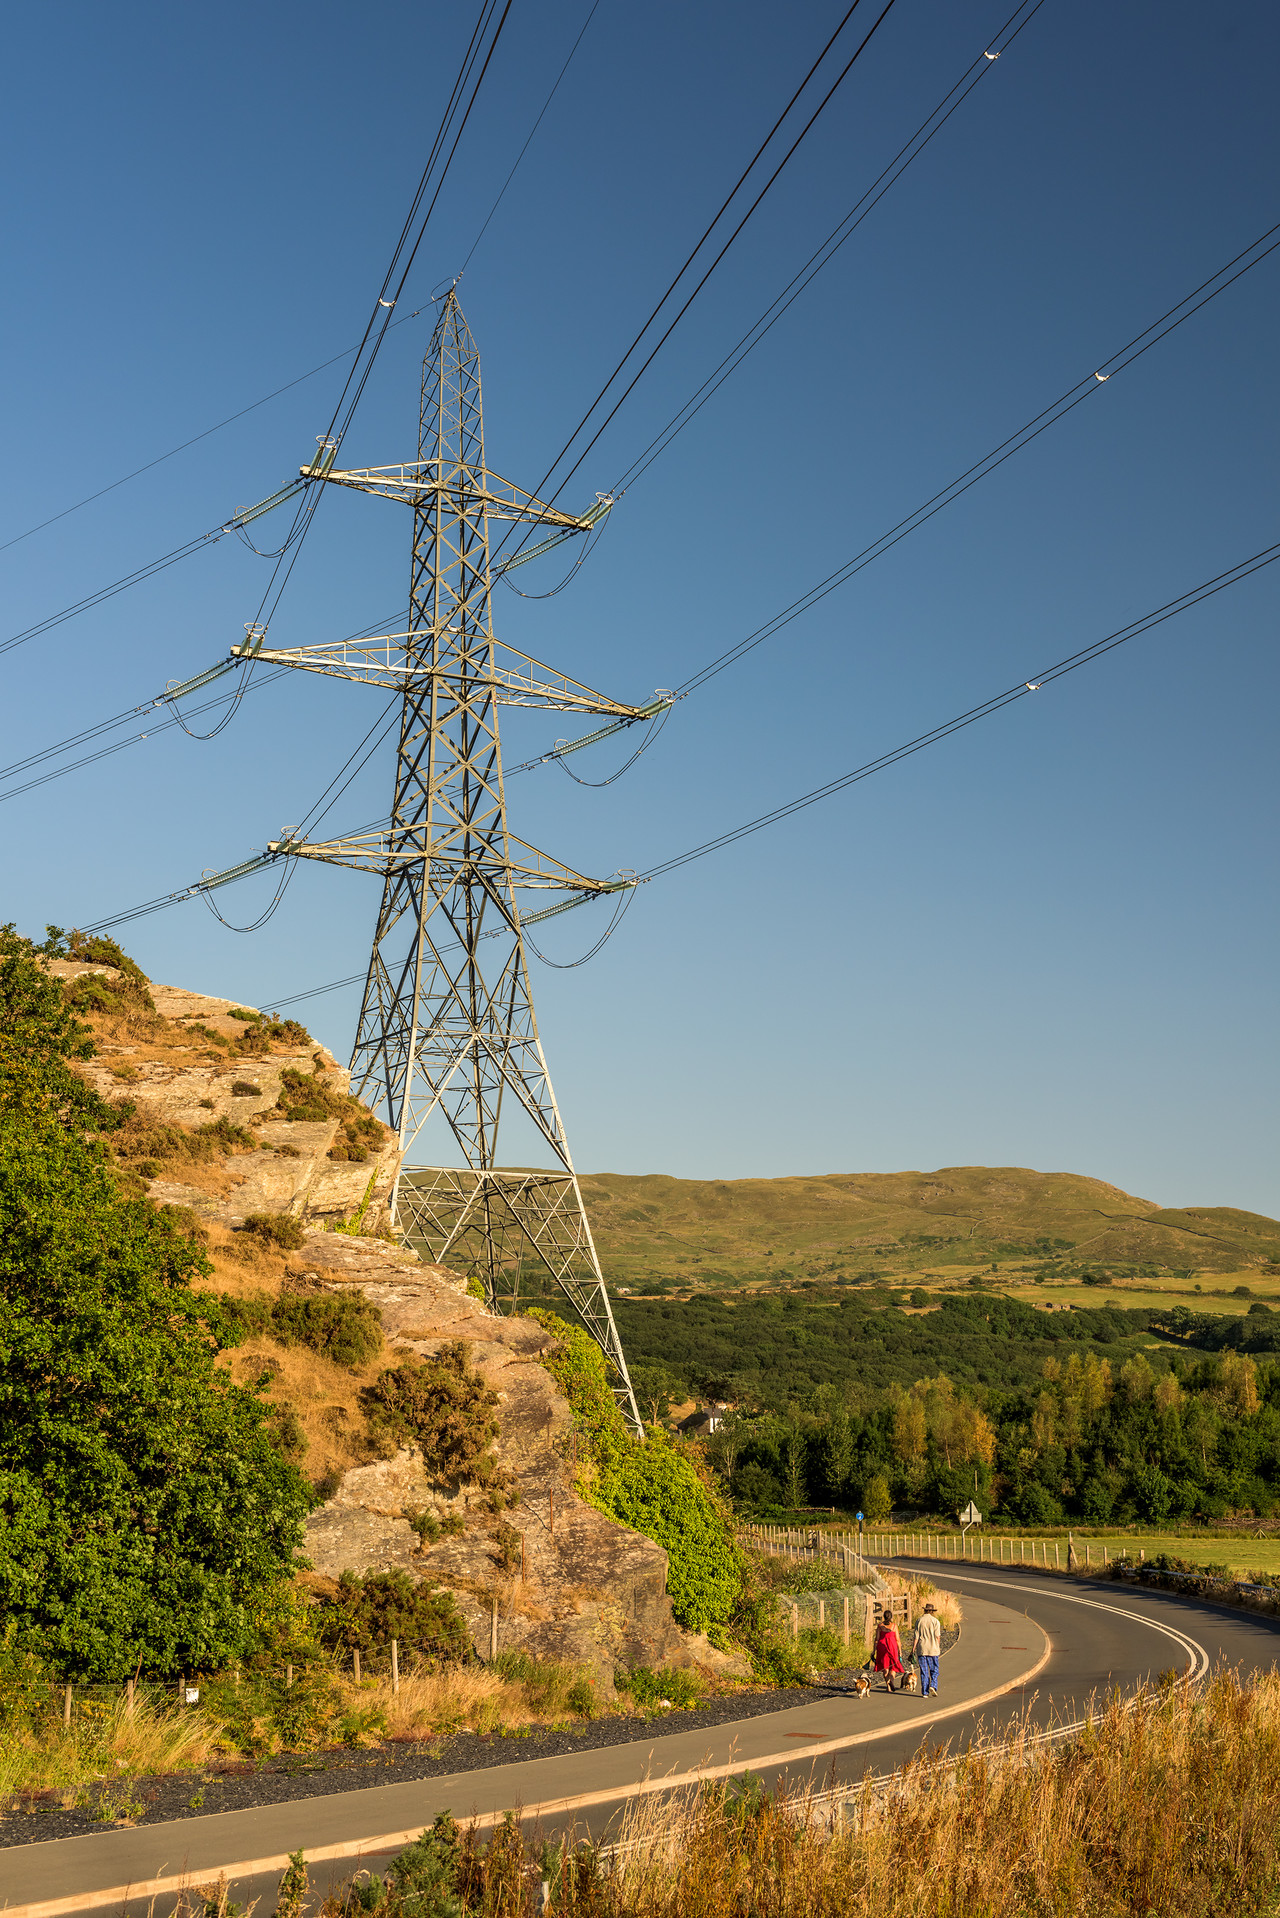 Close-up of electricity transmission tower in hilly landscape in Snowdonia, Wales